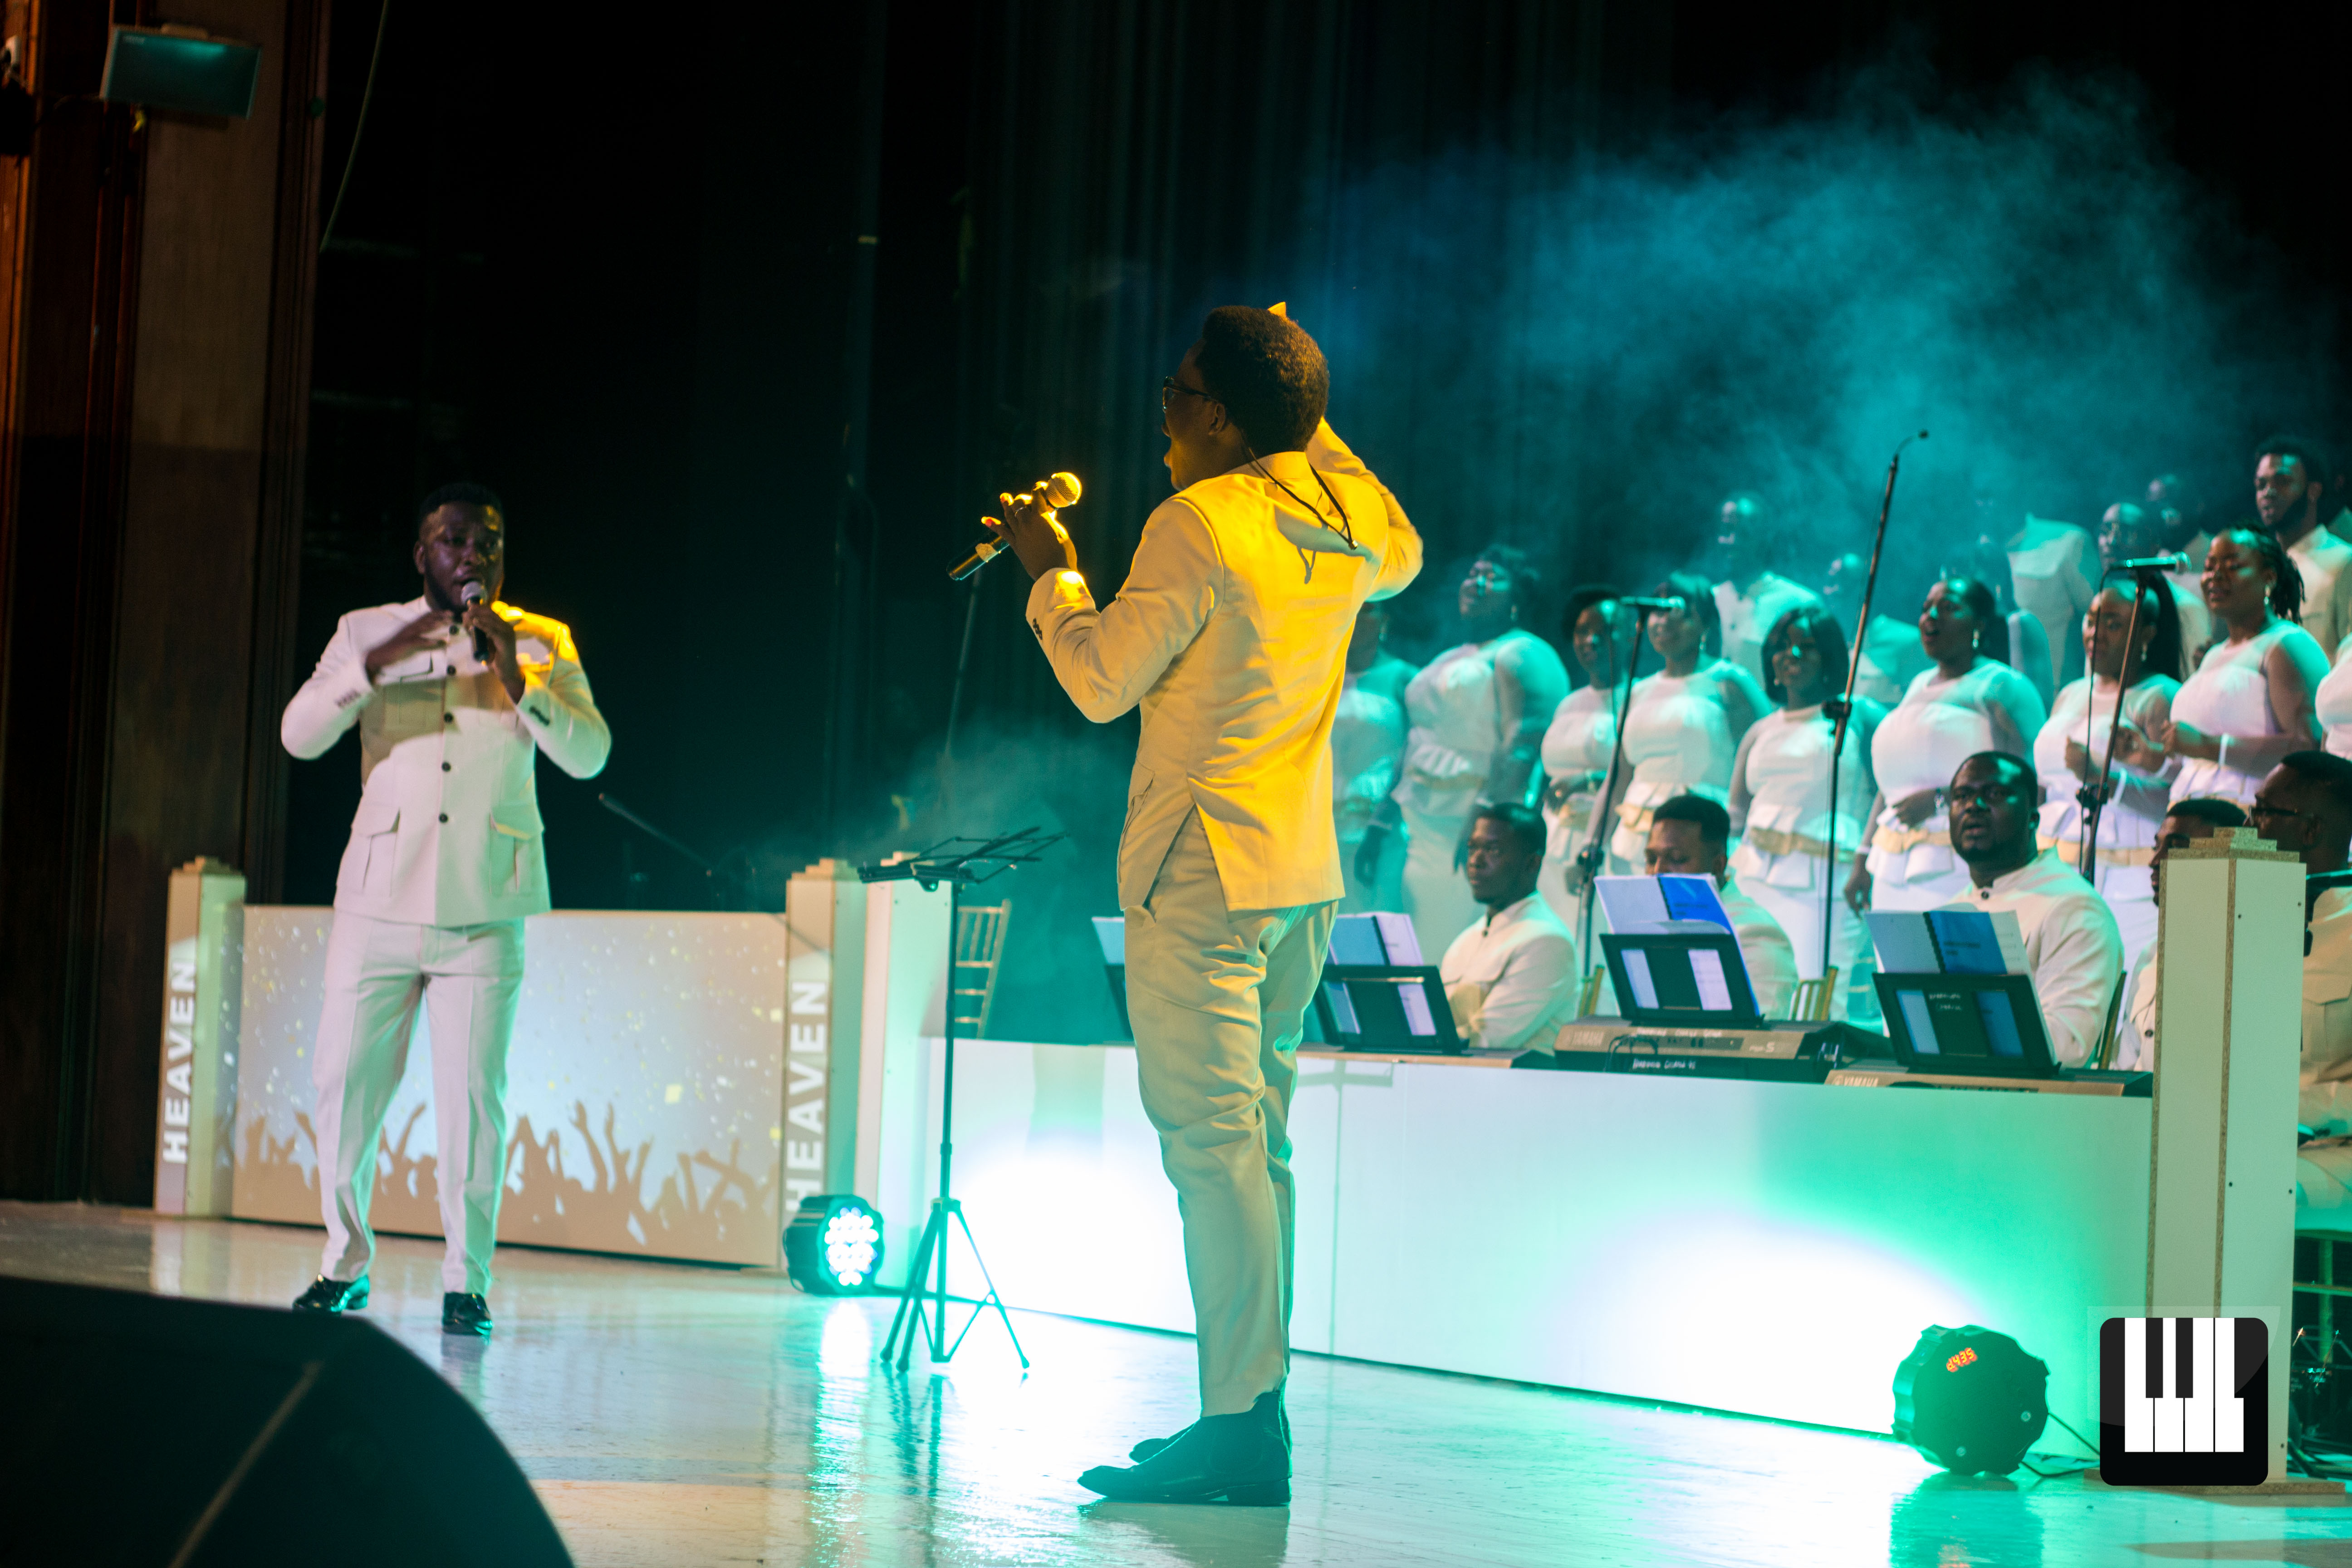 Look Back: Heaven, a Choral Concert with Harmonious Chorale Jesse Johnson witnessed the first concert in the Harmonious Triad and shares his thoughts on yet another successful Harmonious Chorale event.